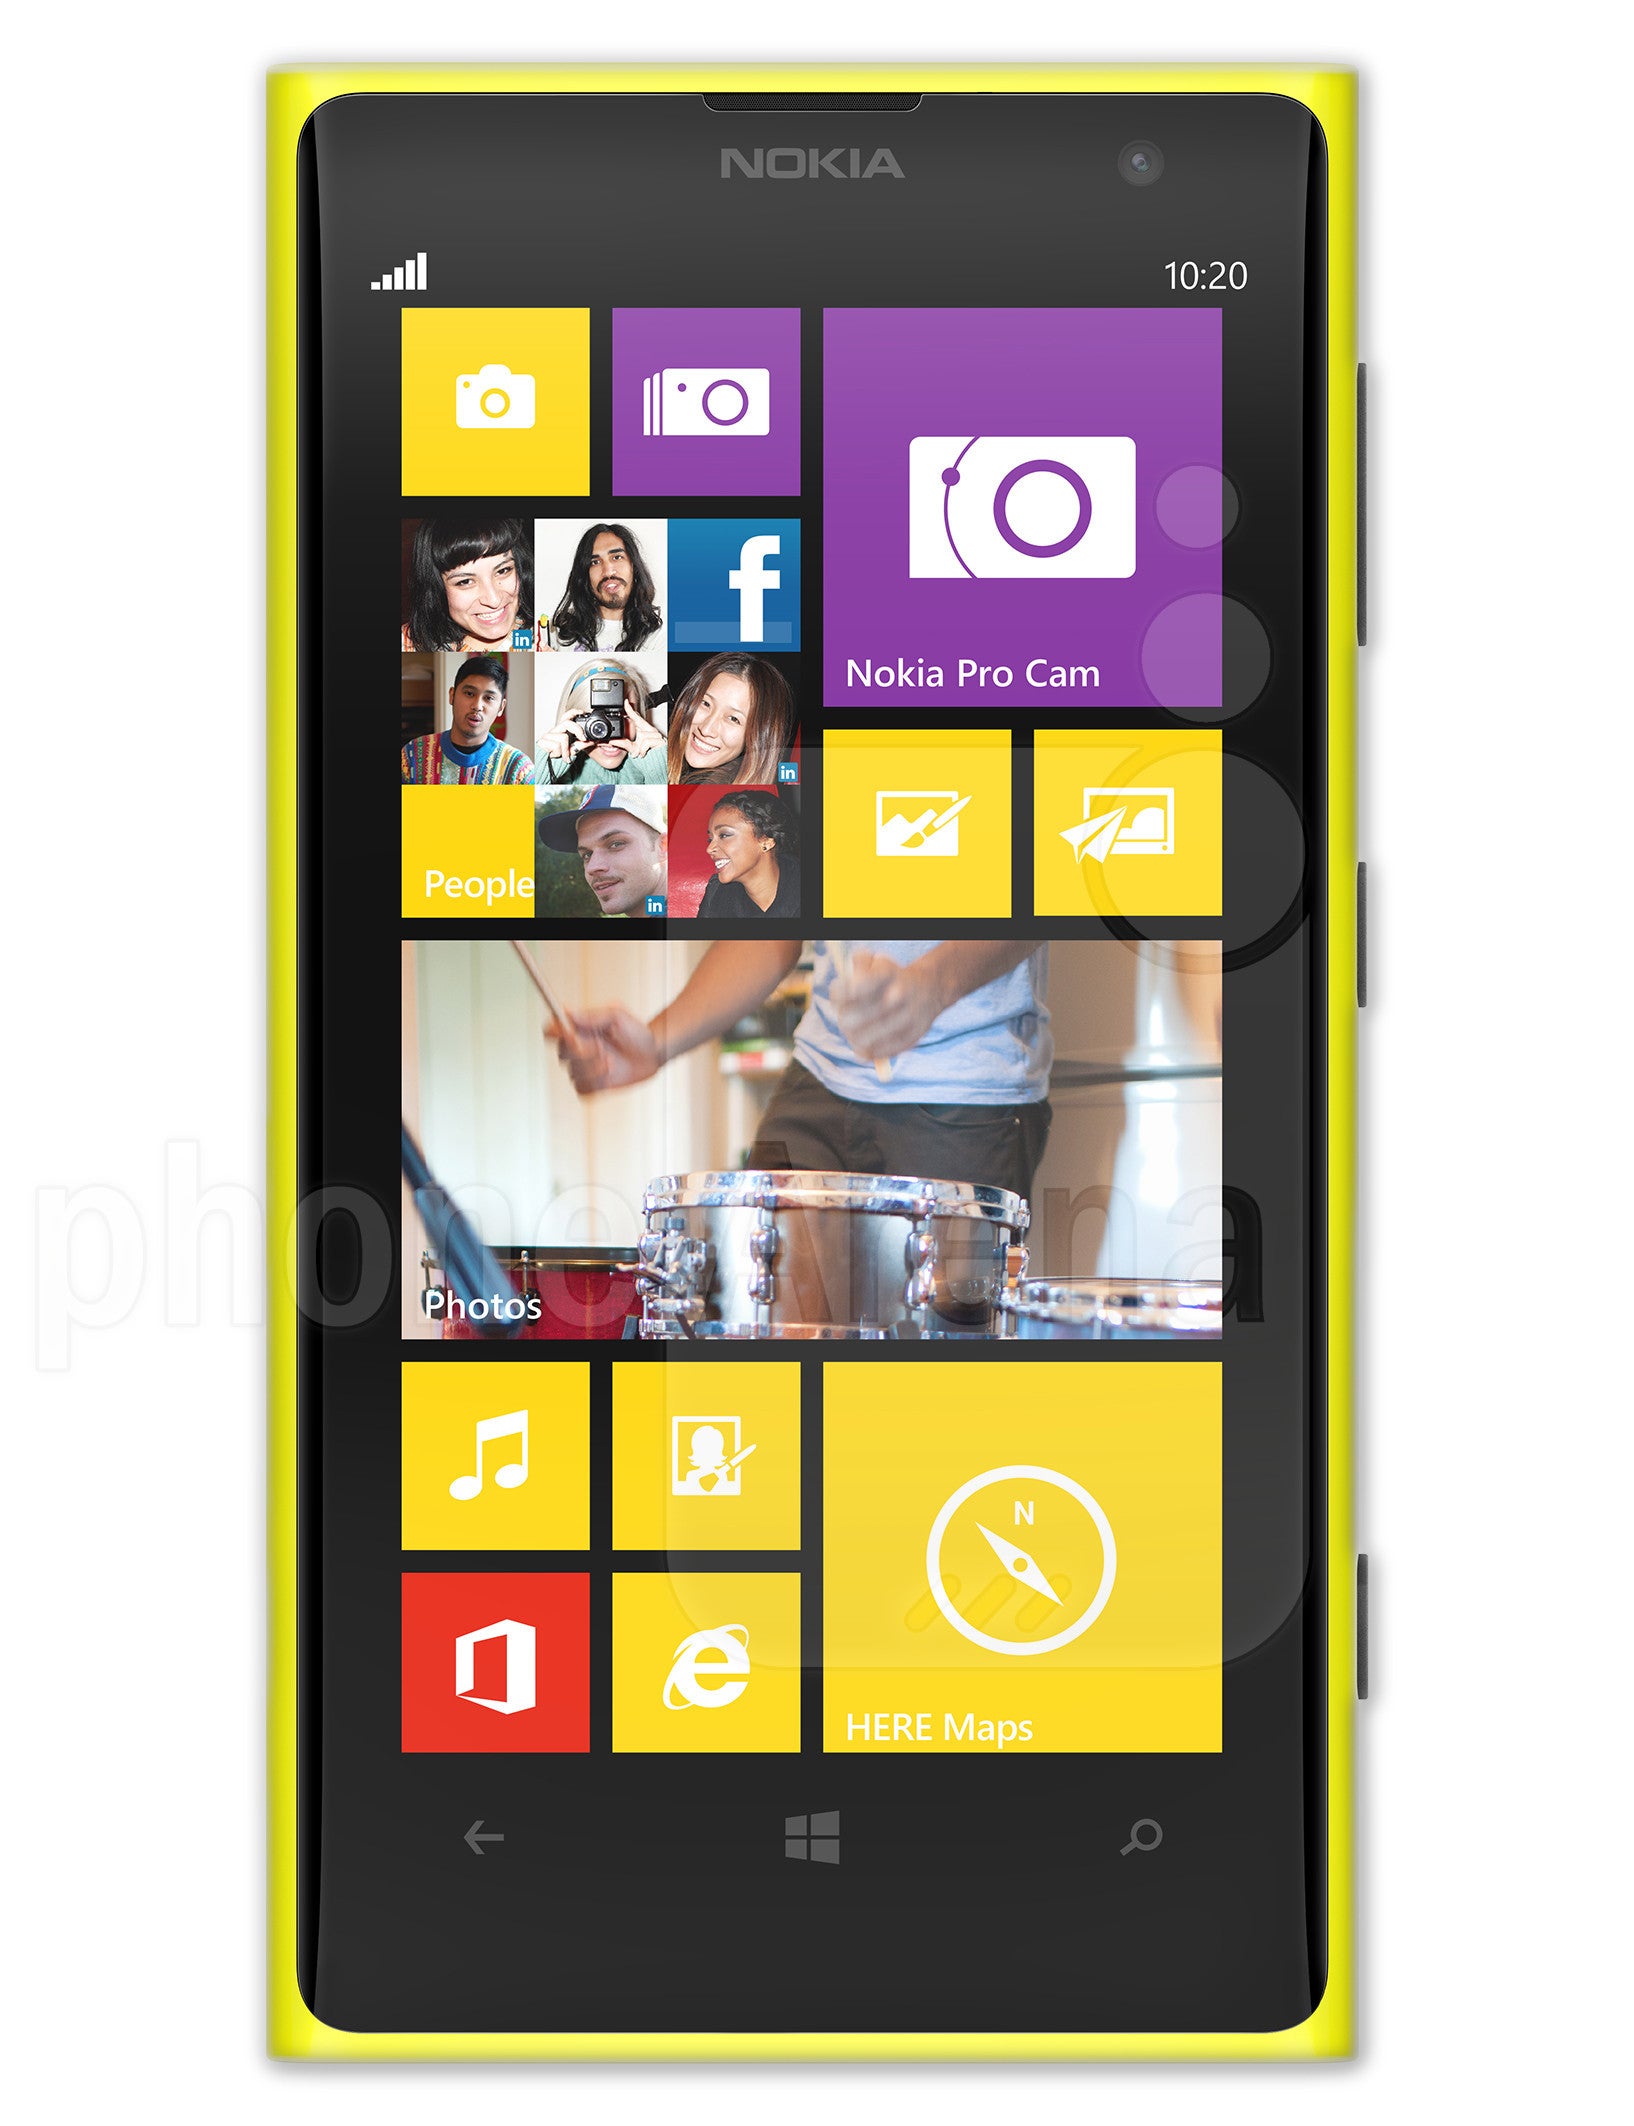 Could the Nokia Lumia 1020 bring 41MP to the enterprise? - IBM says its enterprise customers prefer Windows Phone handsets at work